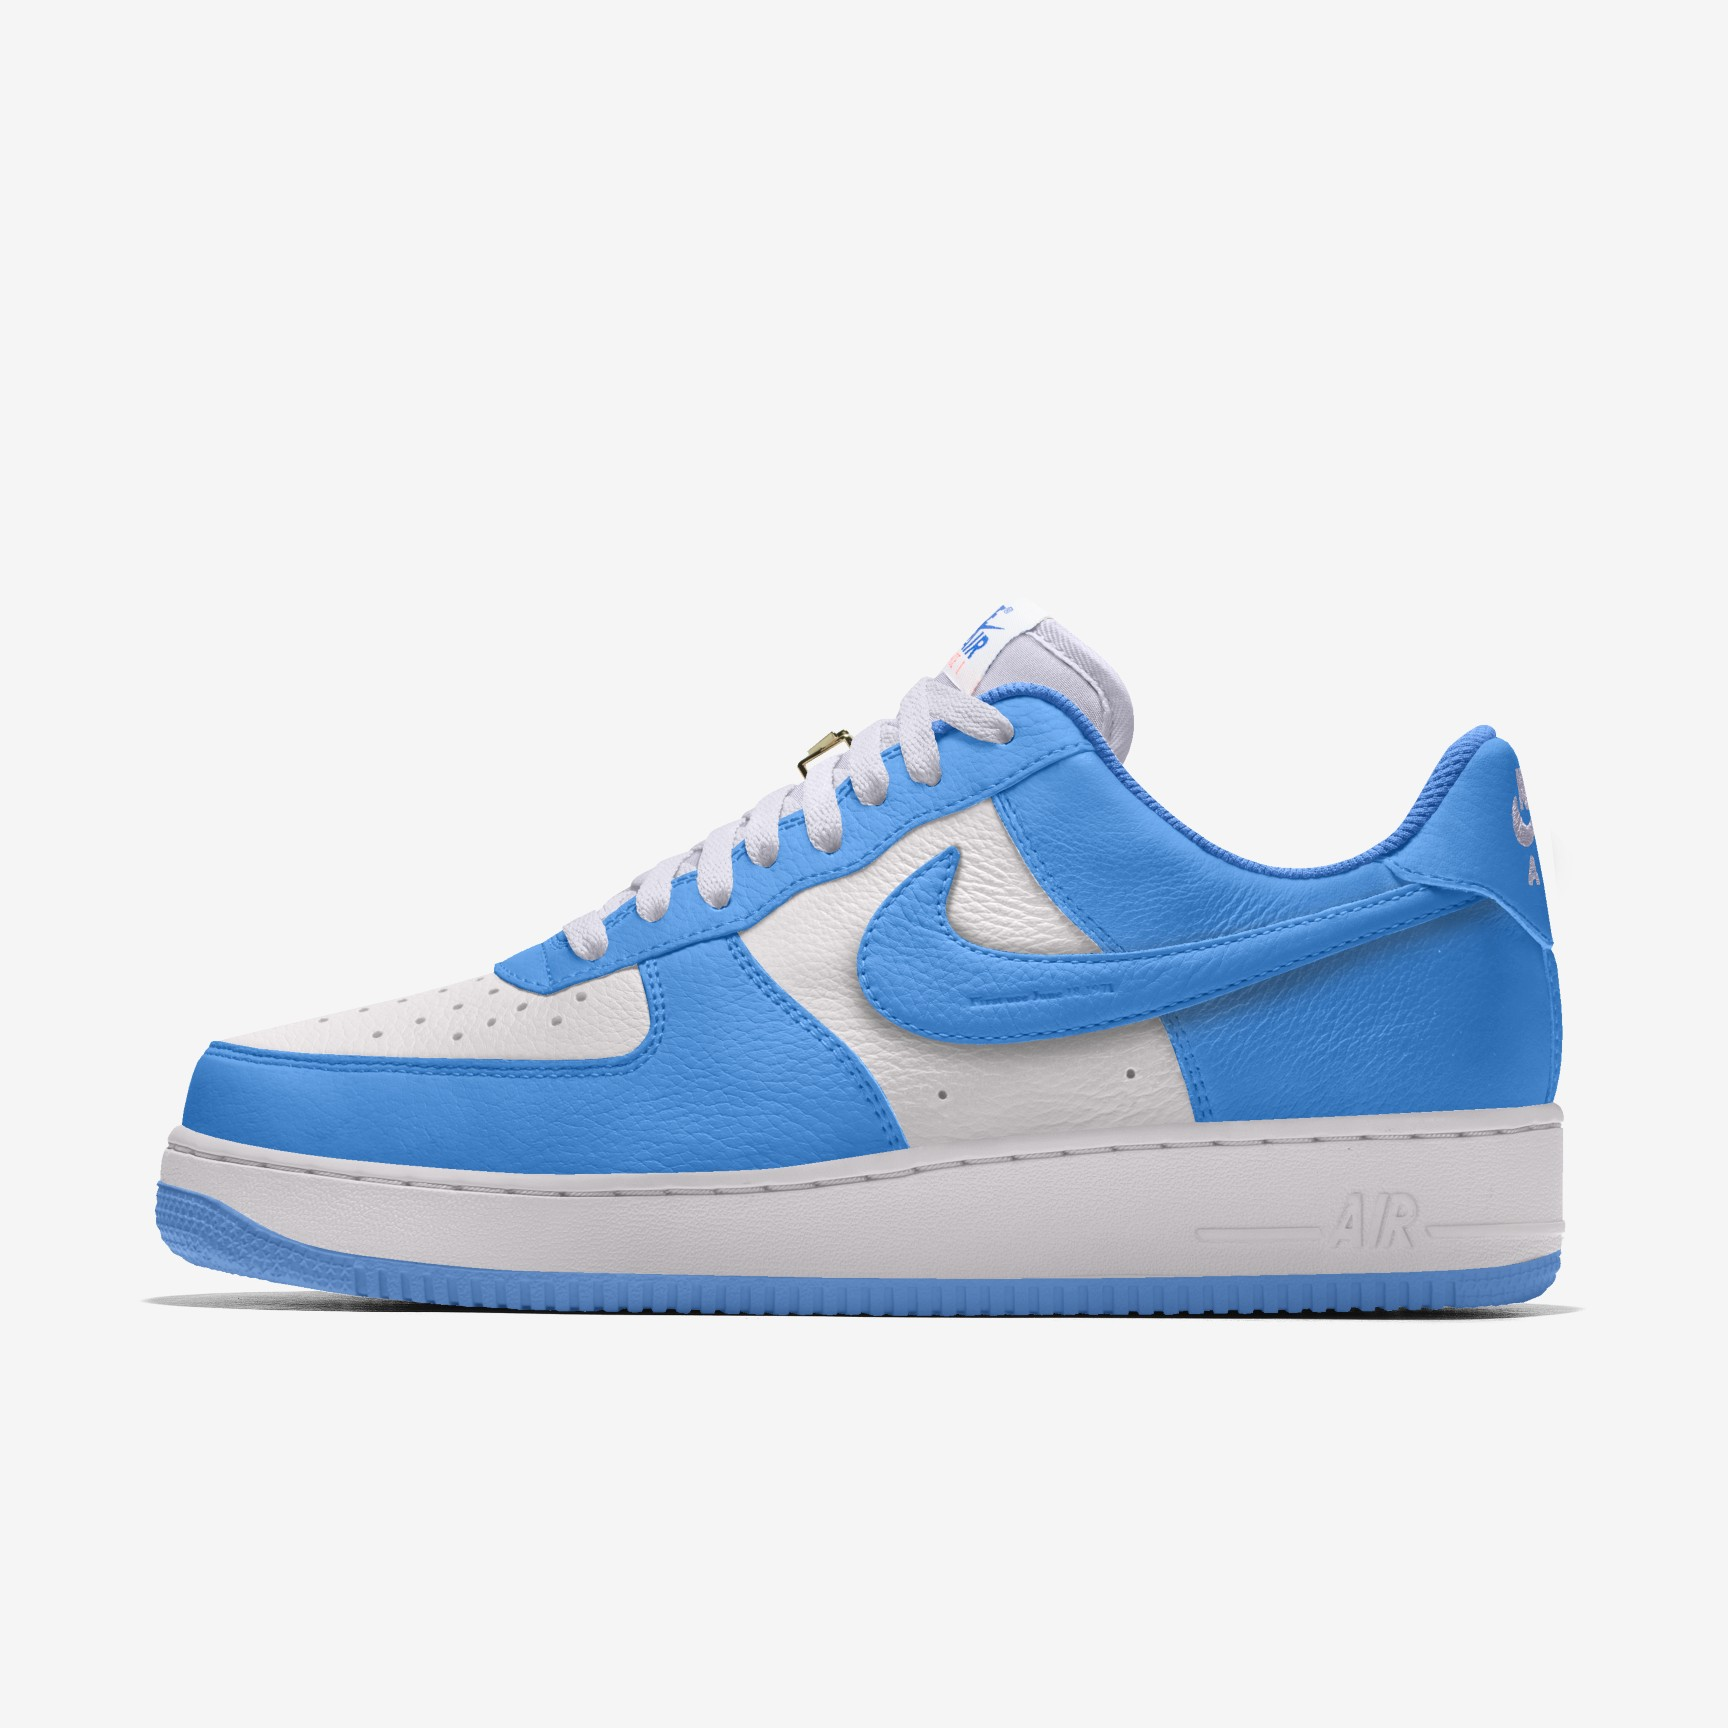 NIKE AIR FORCE 1 LOW UNLOCKED BY YOU X HKR DESIGNED V15.1 ⋆ Hypekickrelease